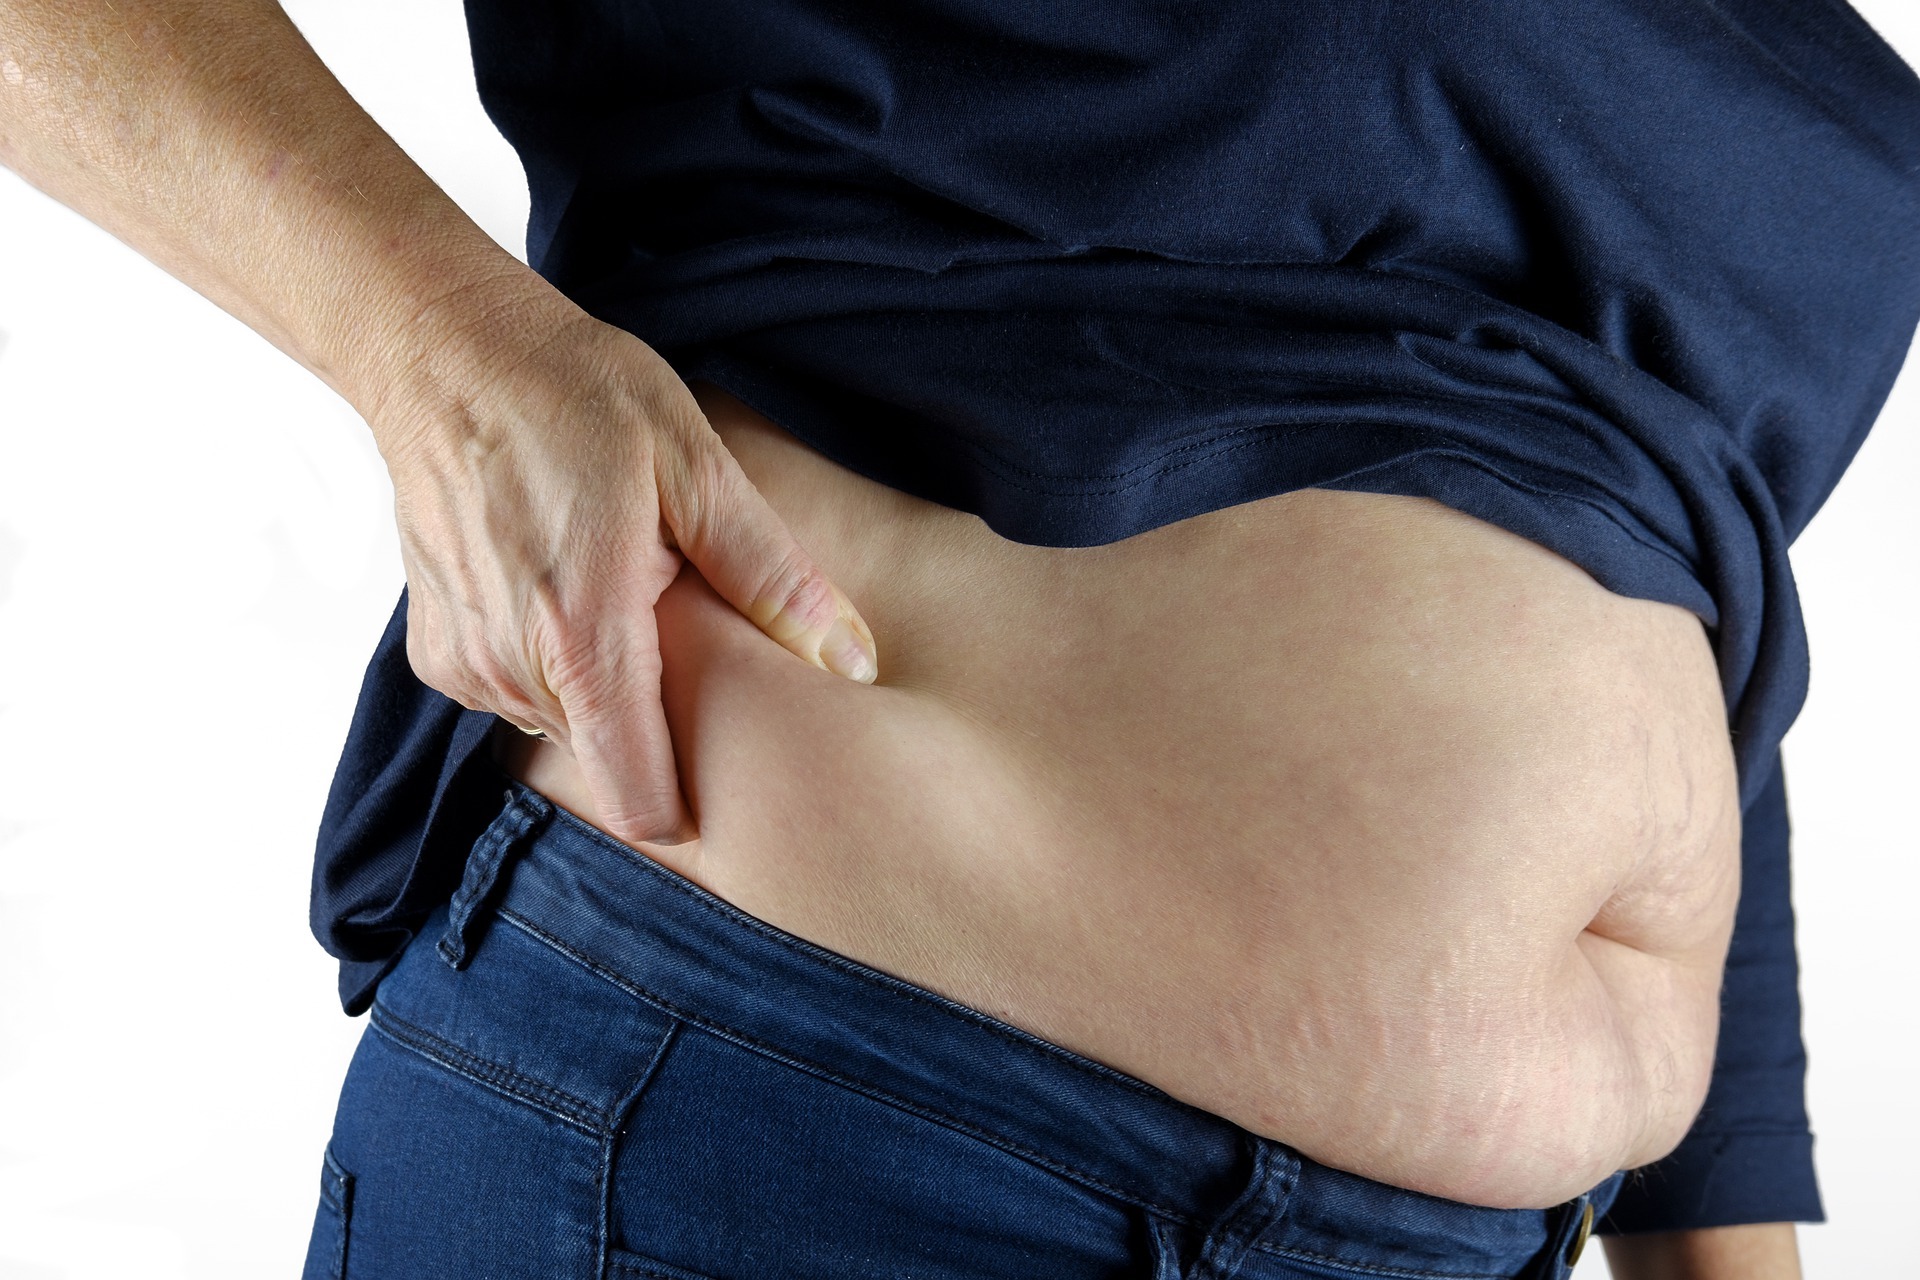  How to Reduce Belly Fat and Bloating Without Any Sit-Ups